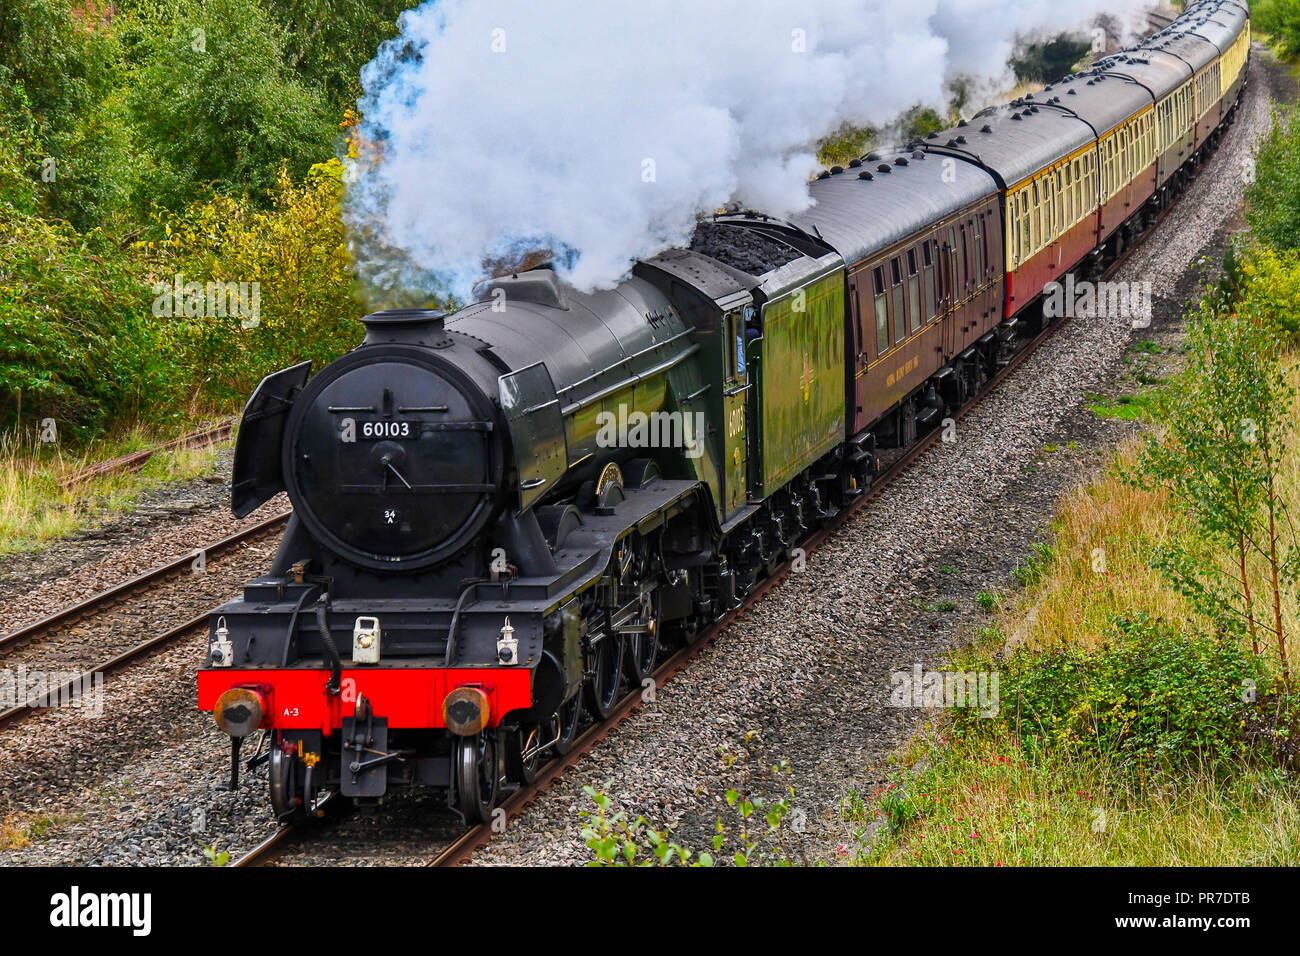 CHESTER, UK - SEPTEMBER 22ND 2018: Flying Scotsman steam train passing through the welsh countryside Stock Photo